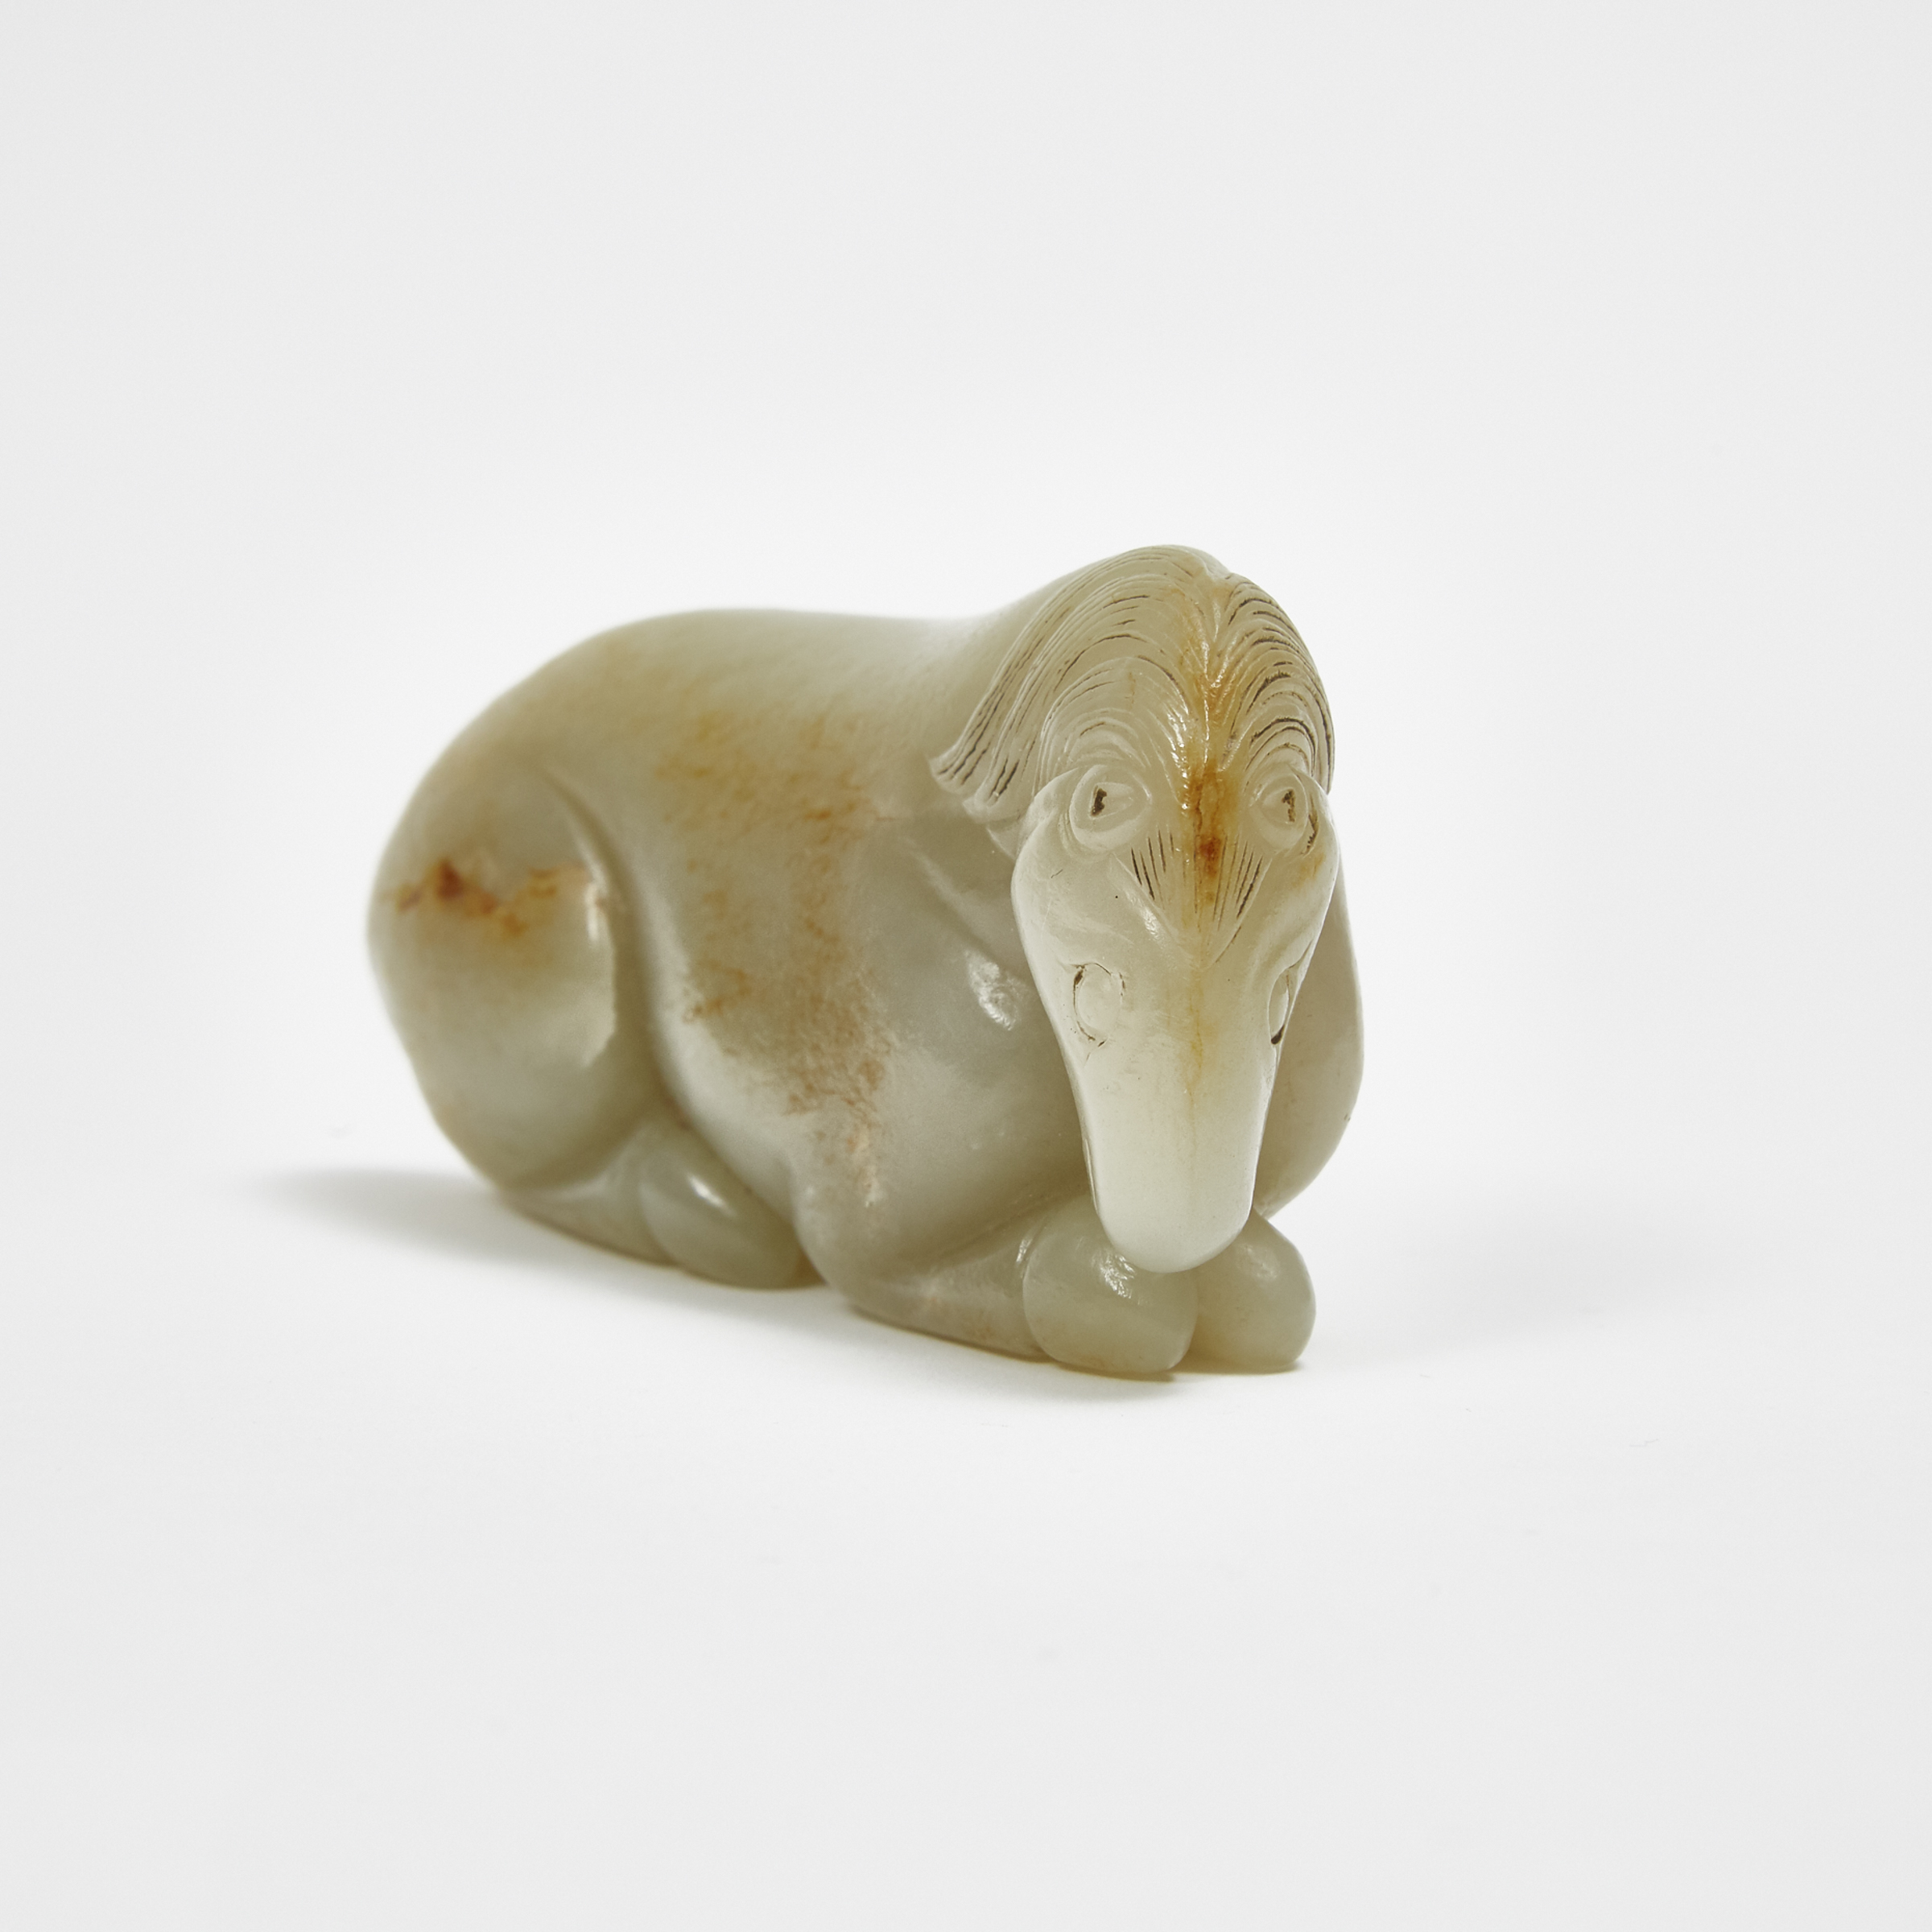 A Greyish-White and Russet Jade Carving of a Horse